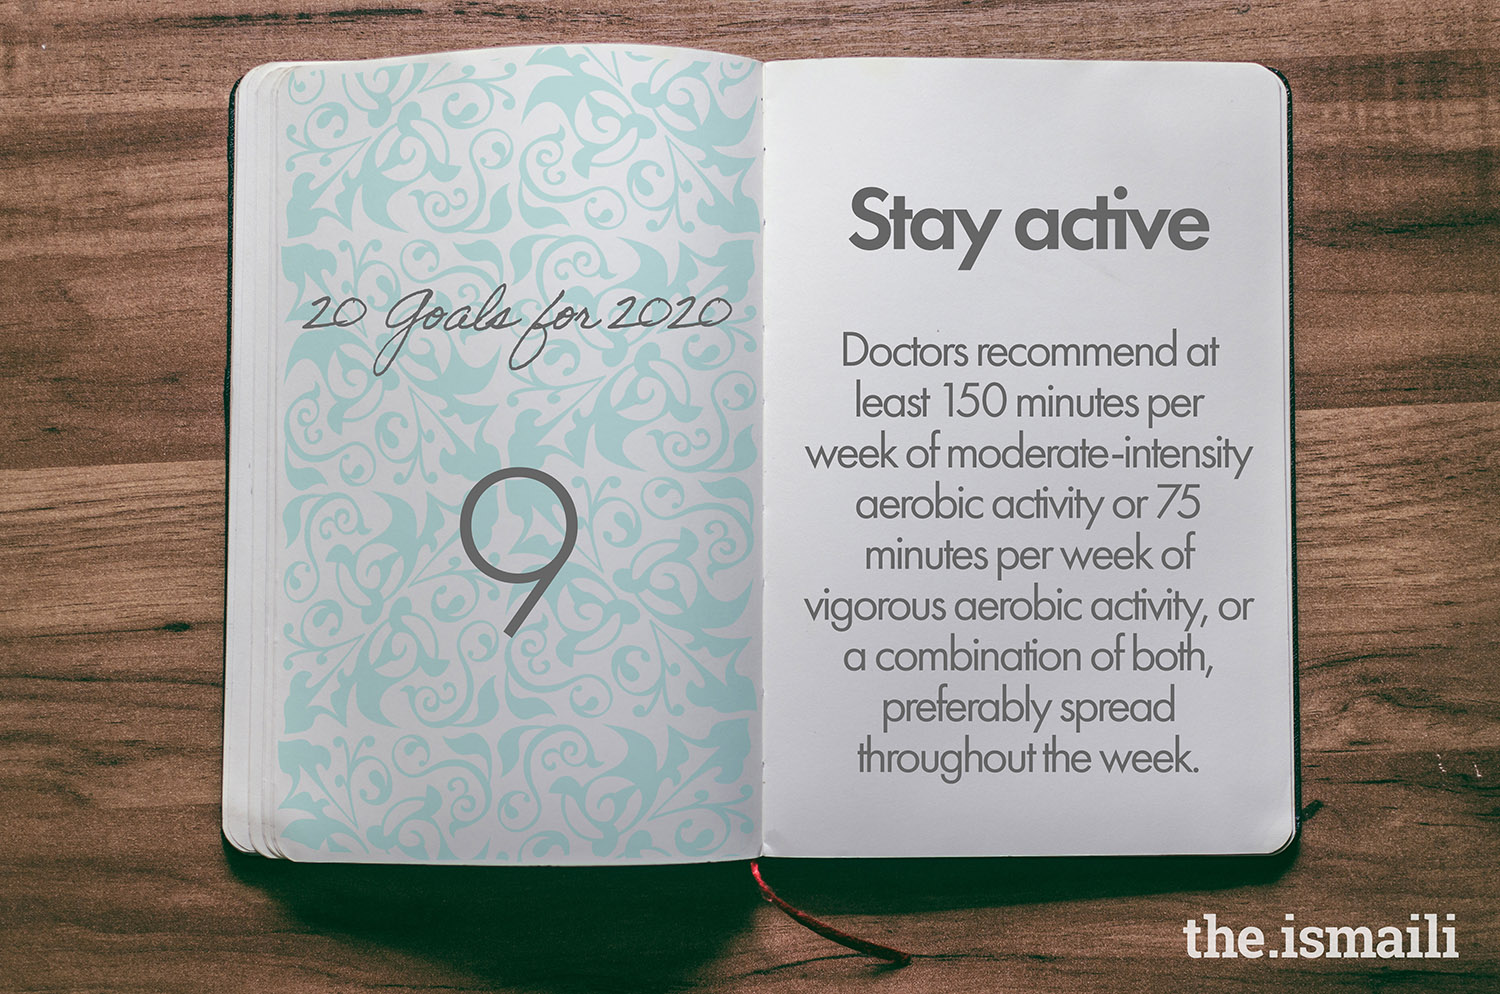 Goal 9: Stay active